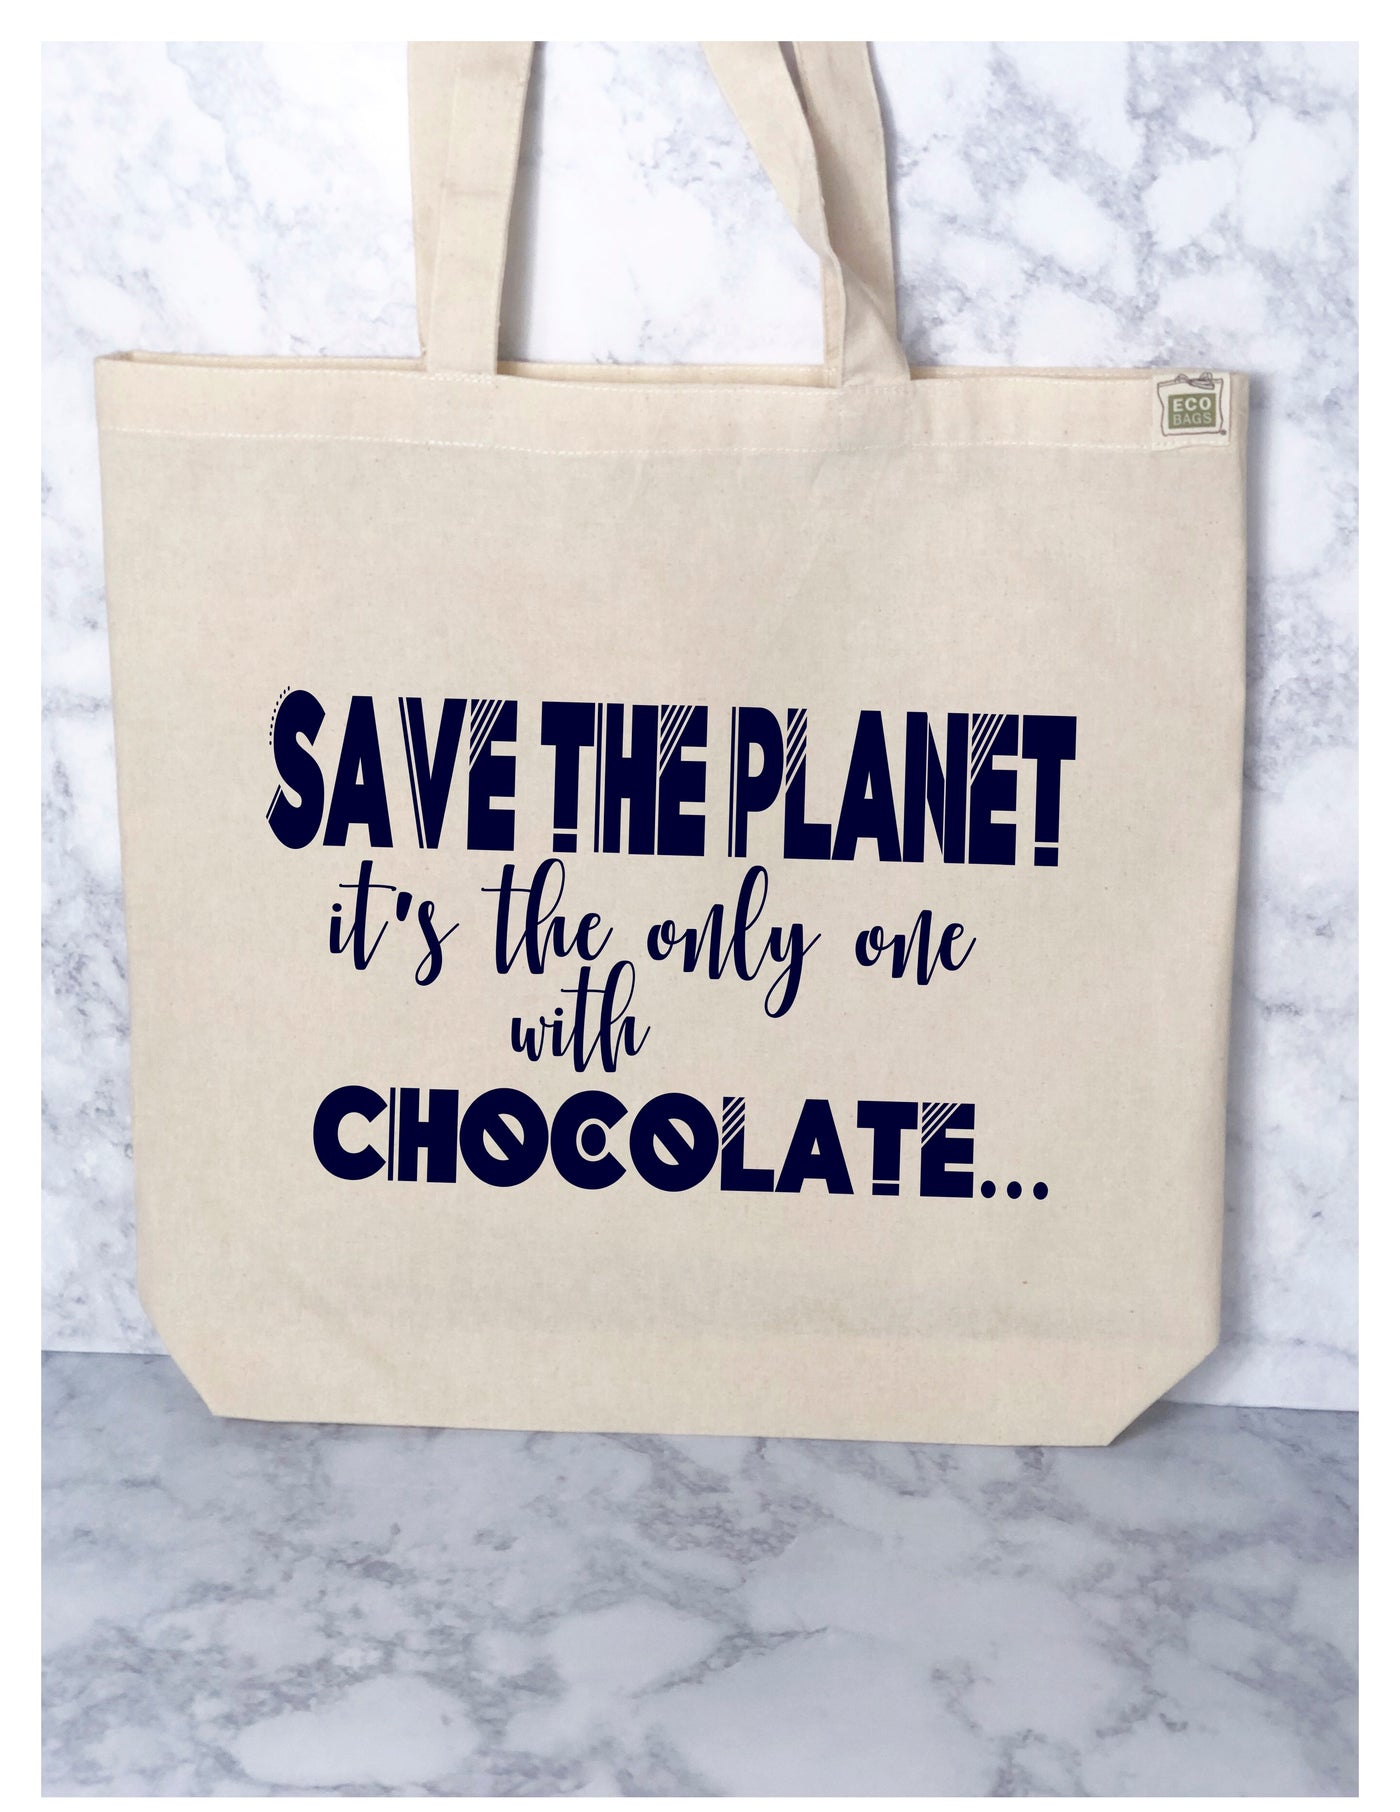 save the planet, it's the only one with chocolate - tote bag